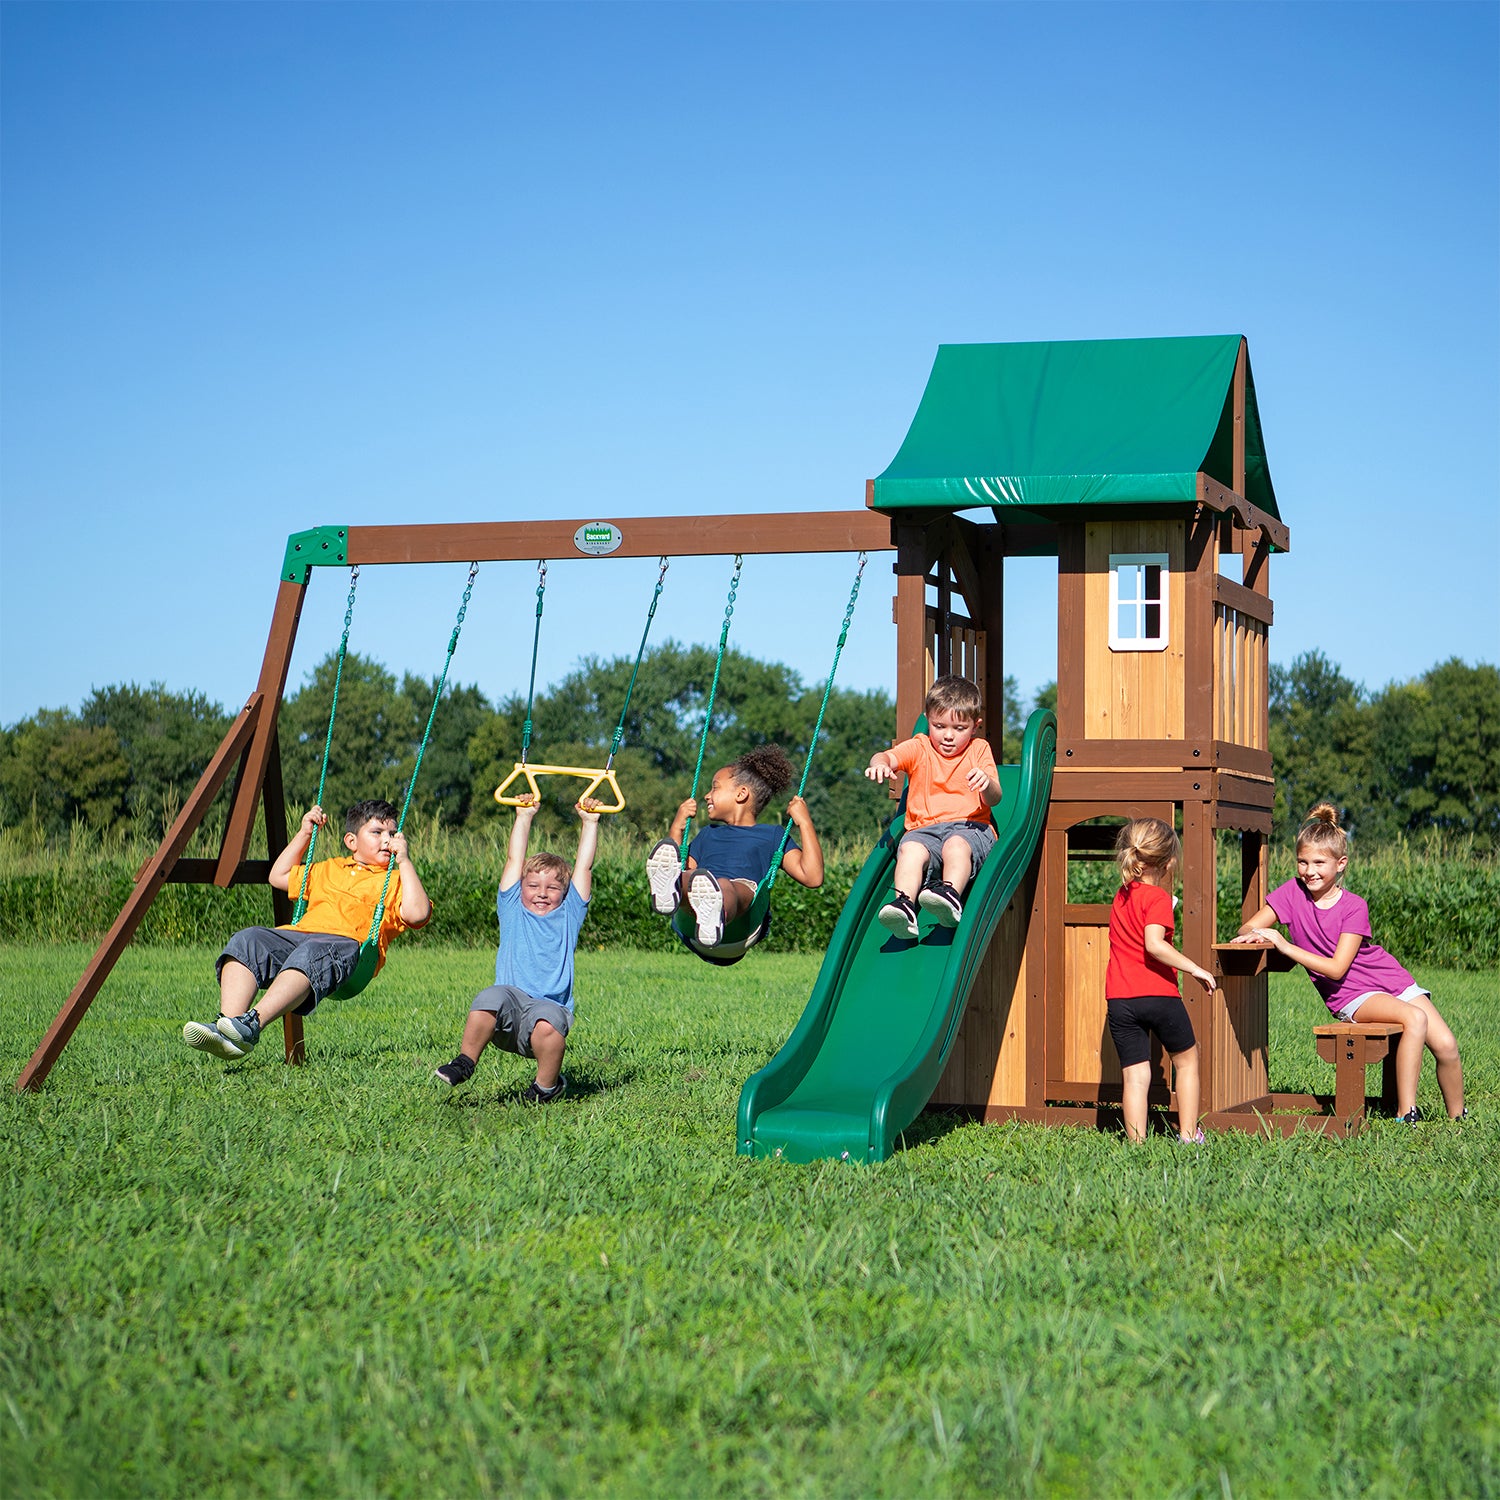 Six children playing on an outdoor play set with 3 swing a slide and cubby house with bench seat in a beautiful fresh green grassed area